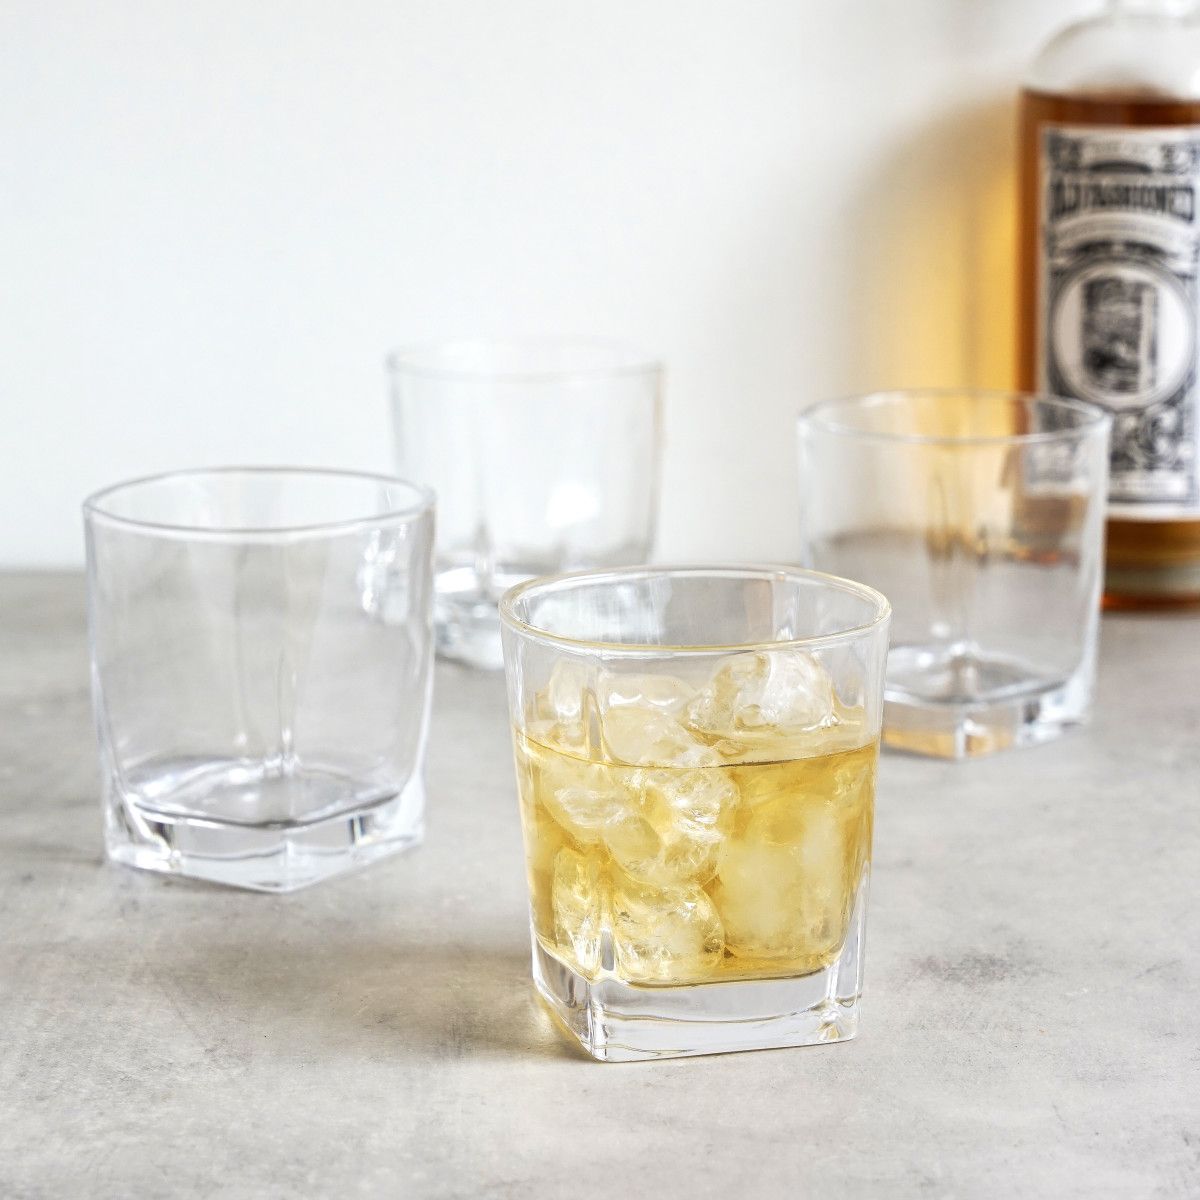 Square Drinking Whiskey Glasses Set of 4, Old Fashioned Glass Cup Bar Set,  Stemless Everyday Rocks W…See more Square Drinking Whiskey Glasses Set of